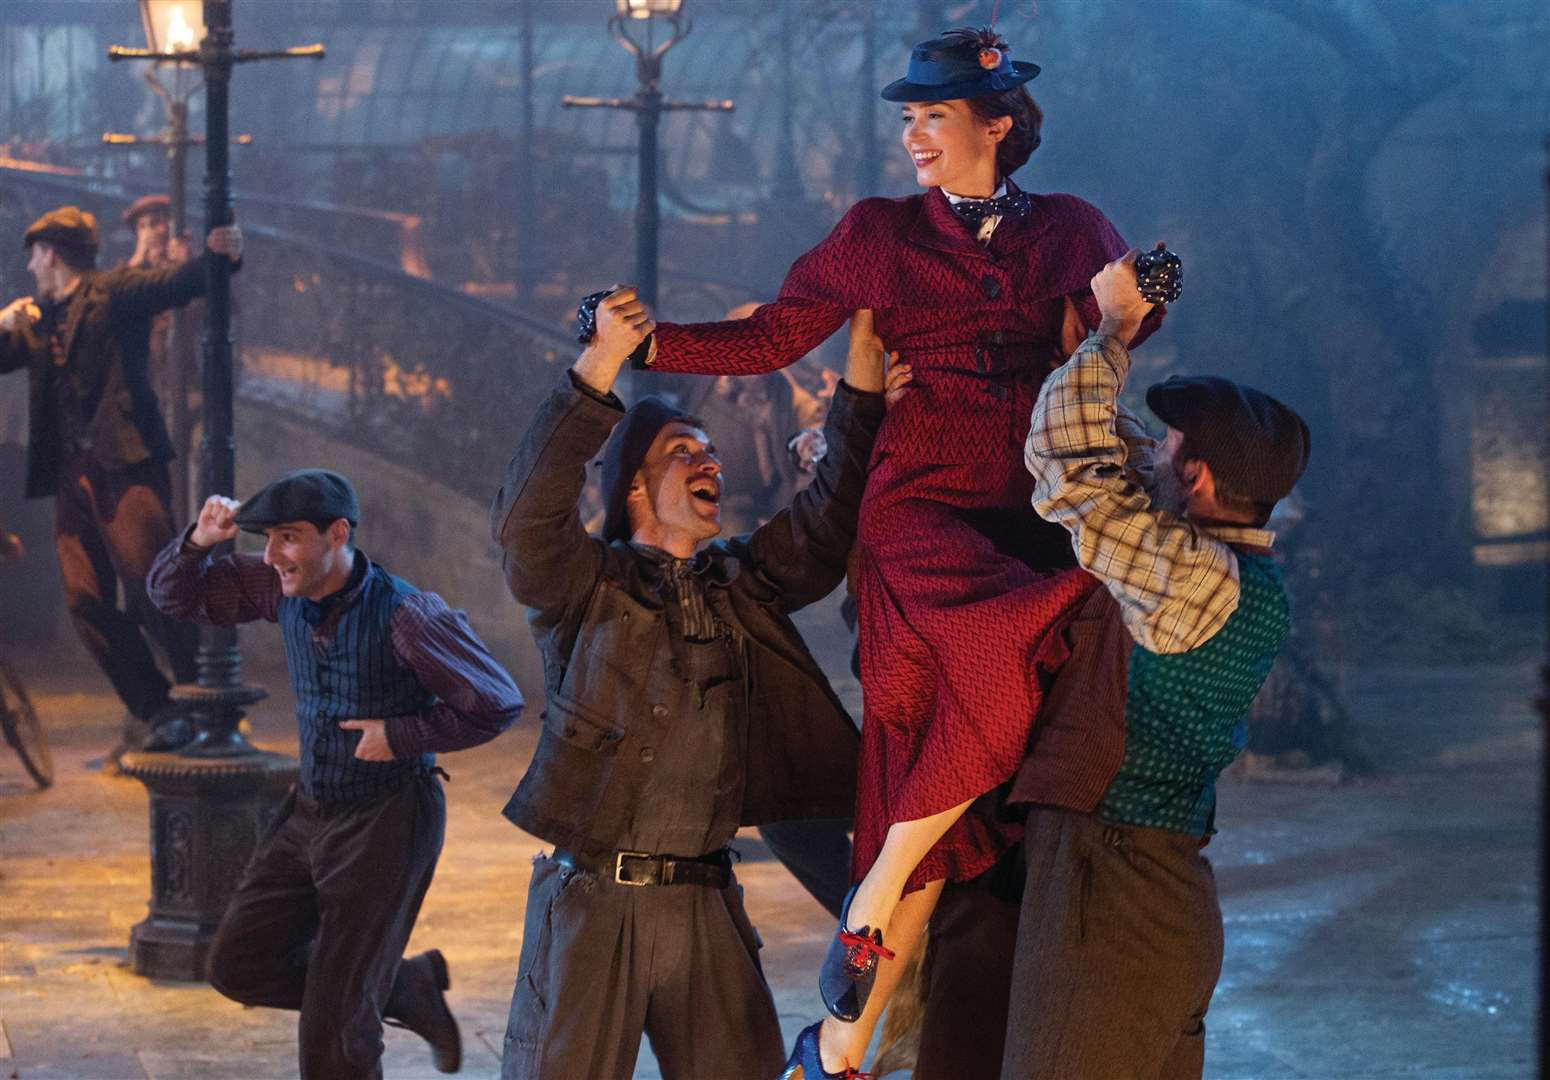 The film is a sequel to the 1964 Mary Poppins, which takes audiences on an entirely new adventure with the practically perfect nanny and the Banks family